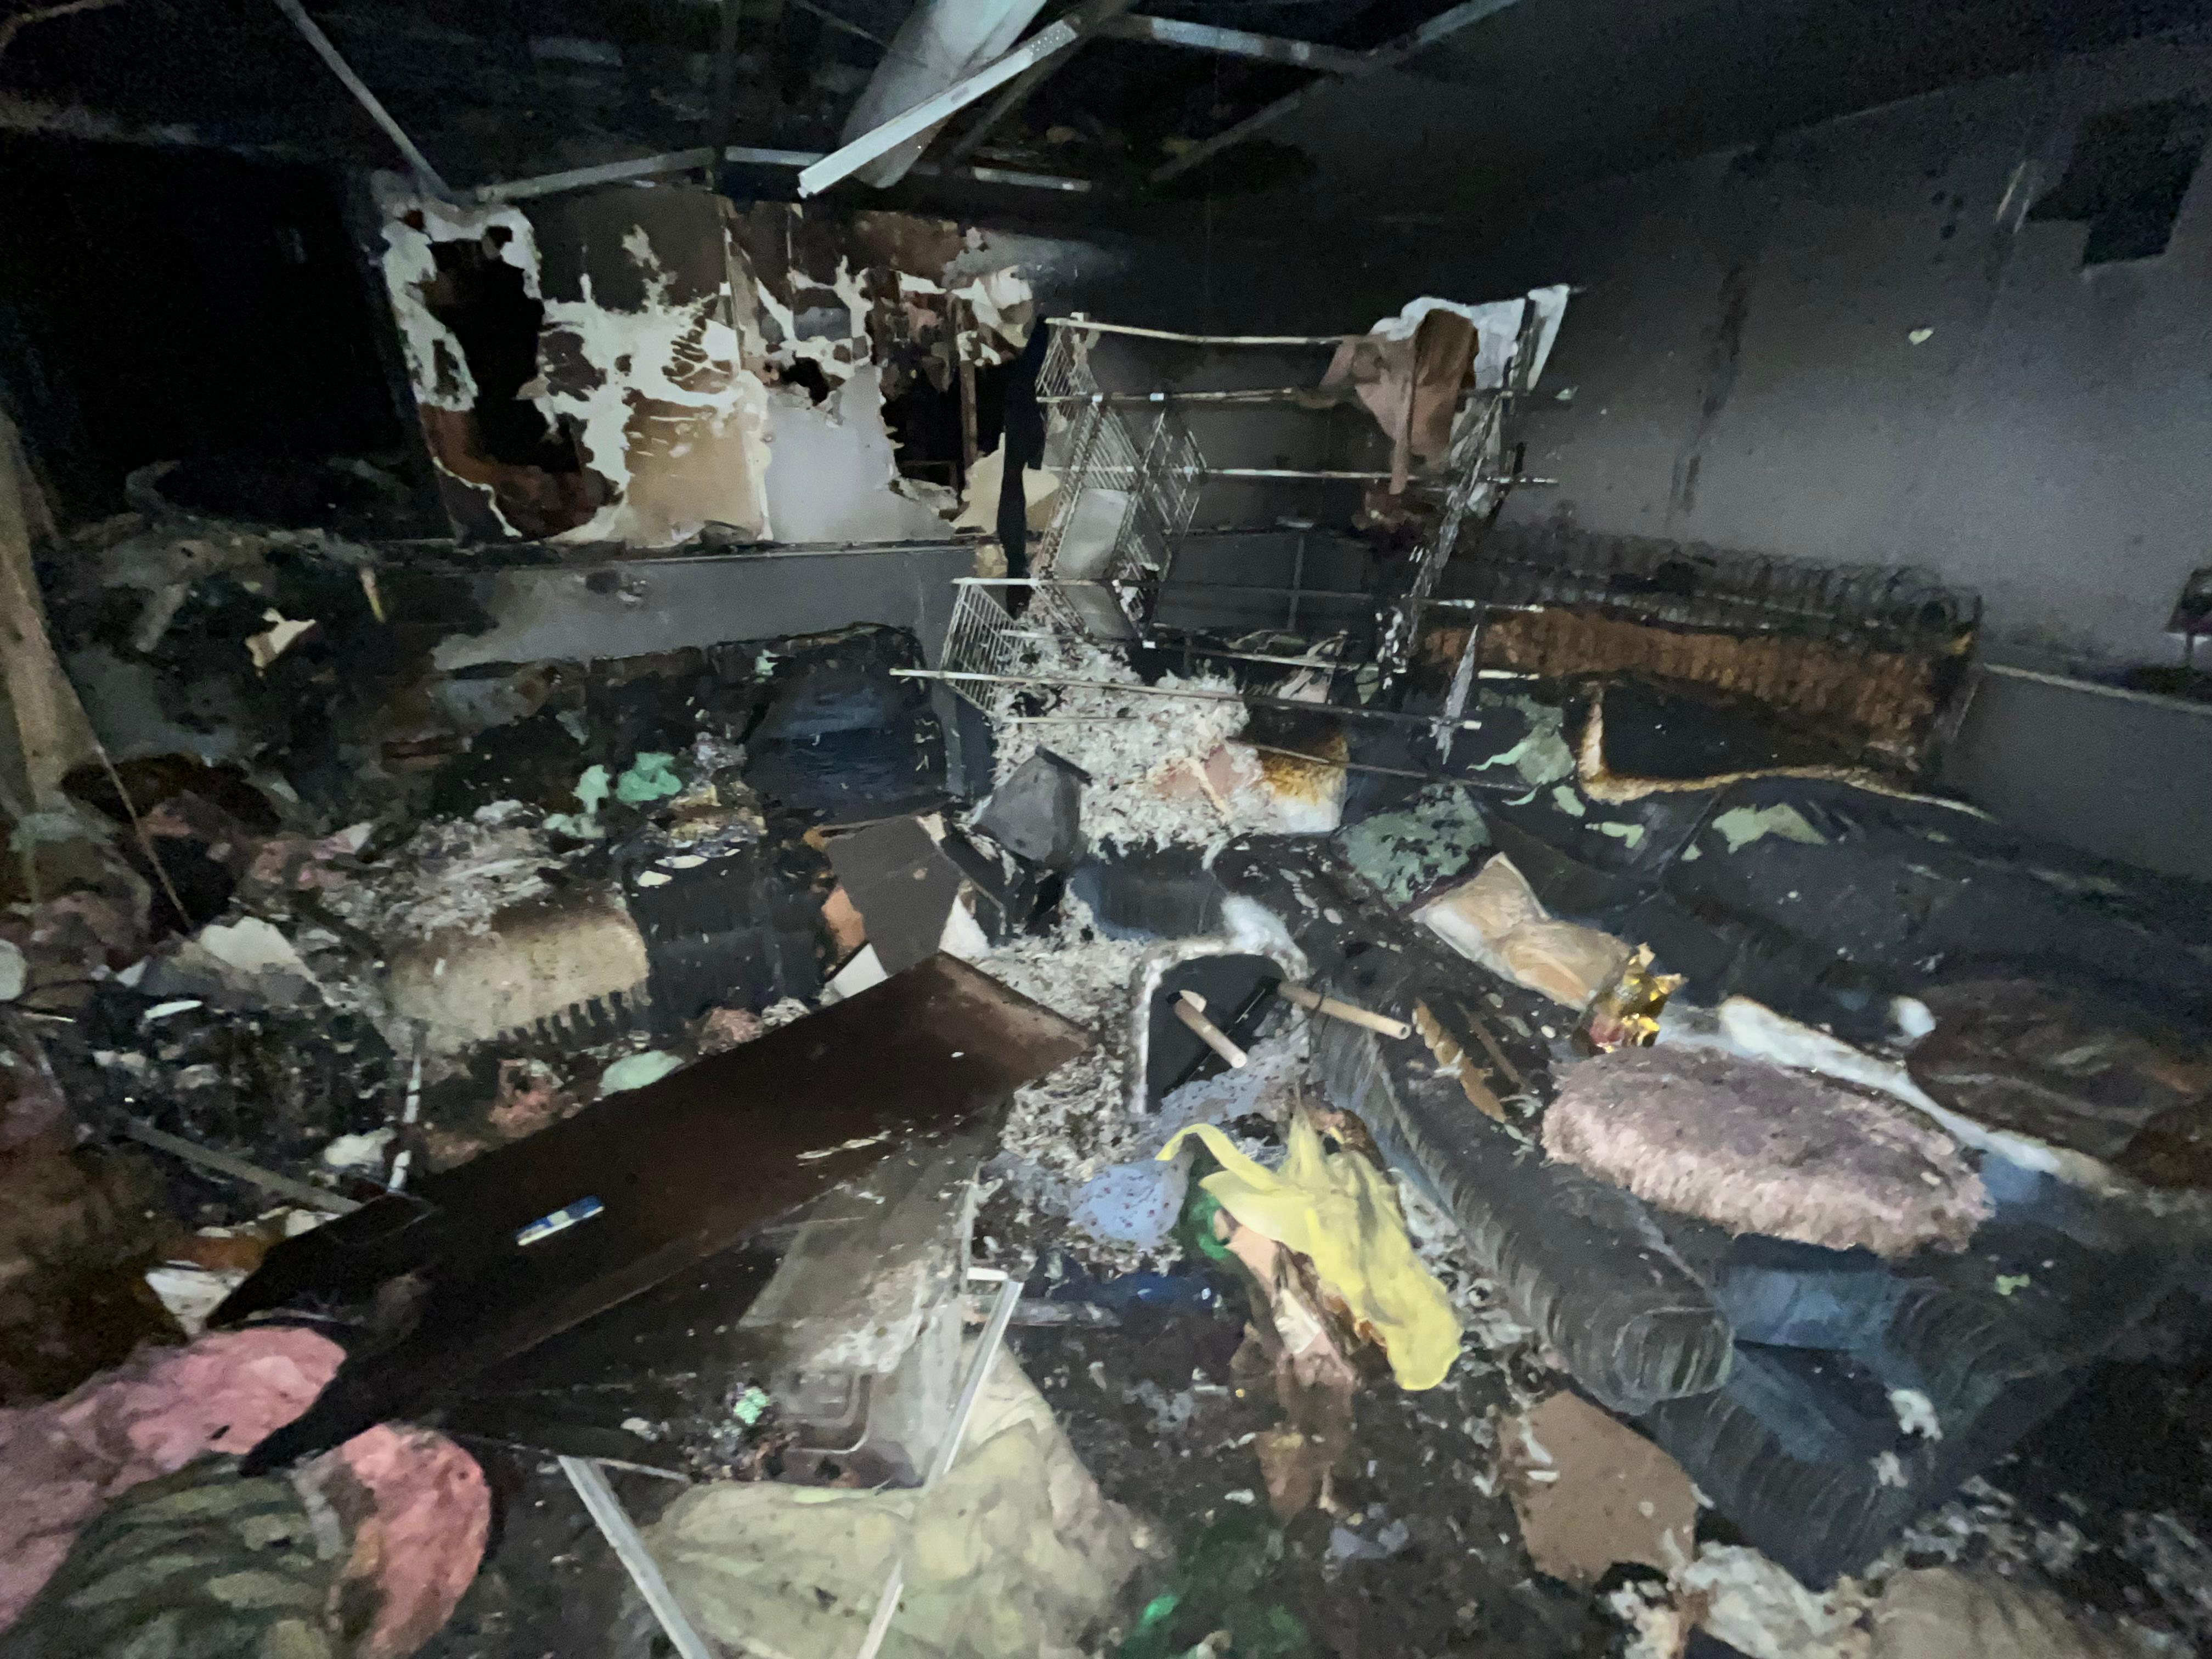 At SERVPRO of Providence, we understand the stress and trauma of a disaster. That's why we offer complete restoration services for fire, mold, and water damage in West End, RI . Give us a call to schedule services!